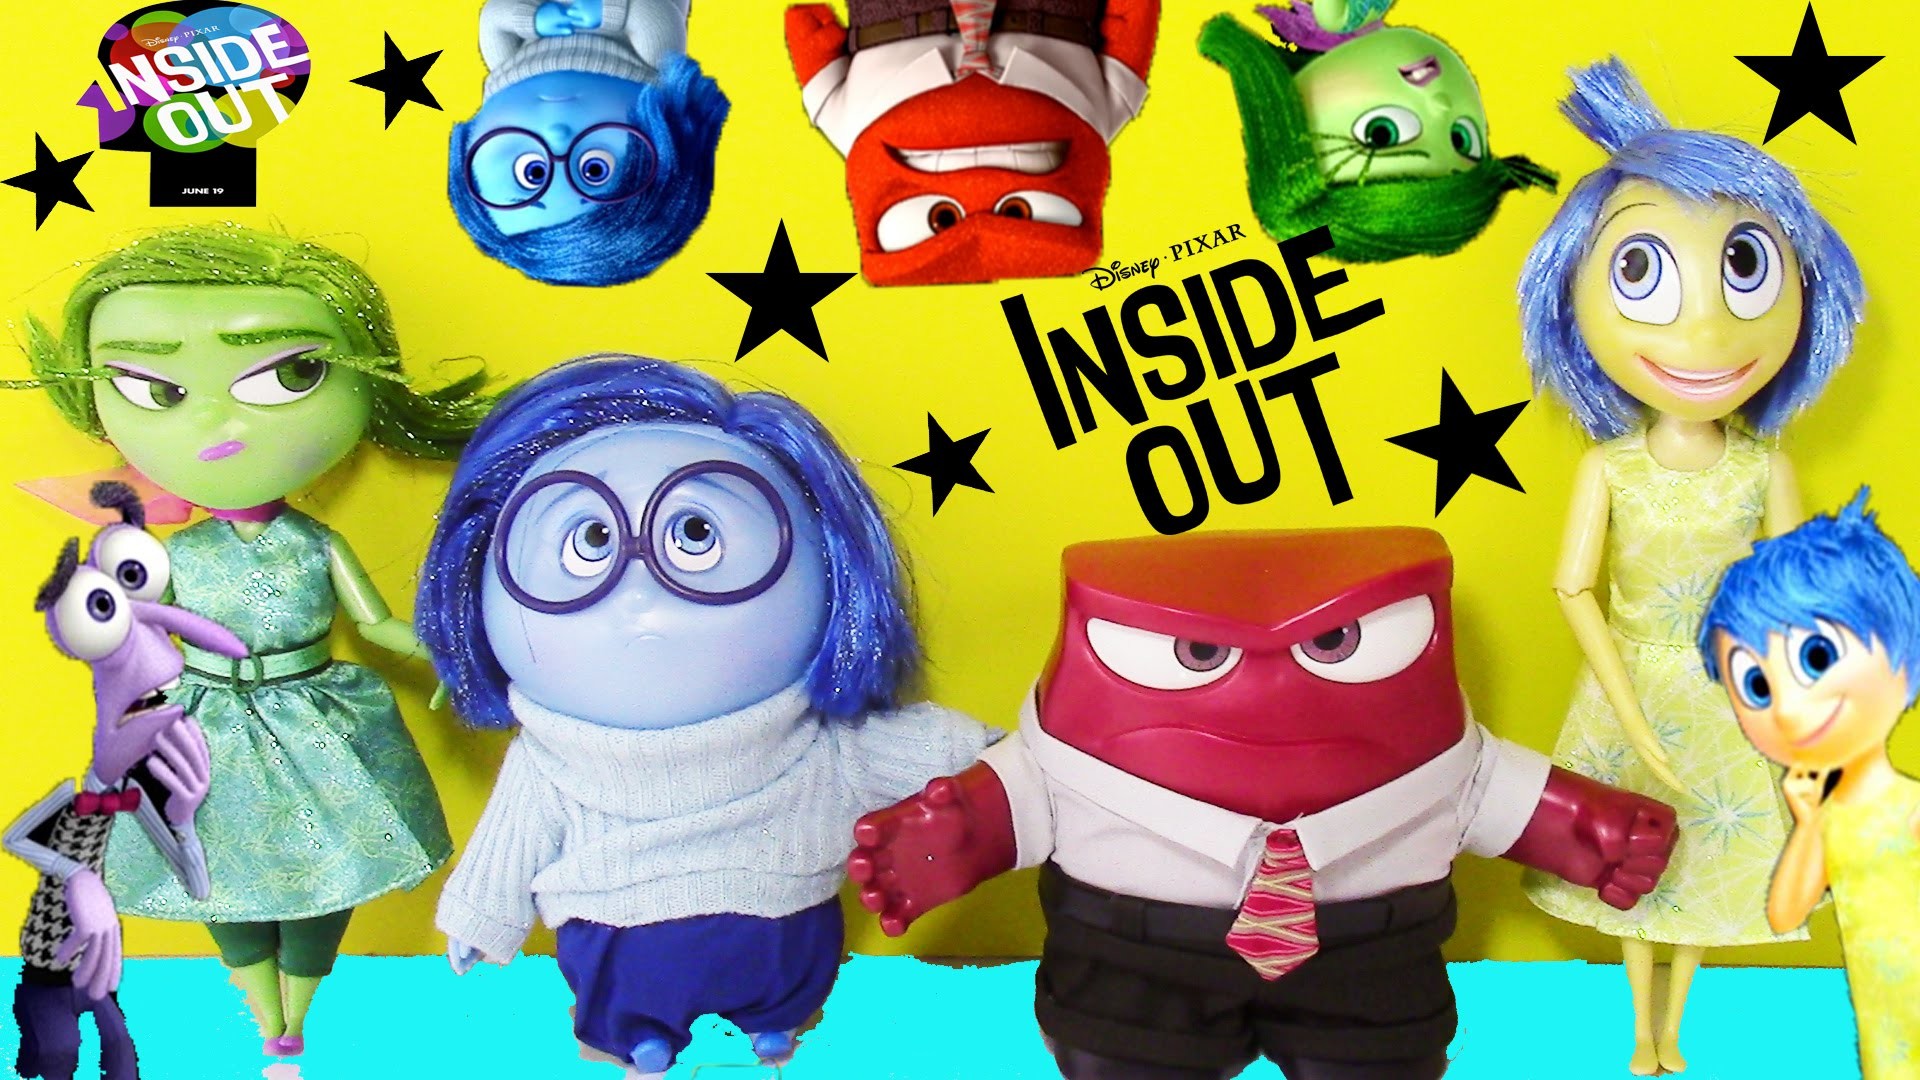 1920x1080 Disney Pixar's Inside Out TOYS Dolls! Riley's 5 emotions JOY SADNESS ANGER  DISGUST! Toy Haul - YouTube